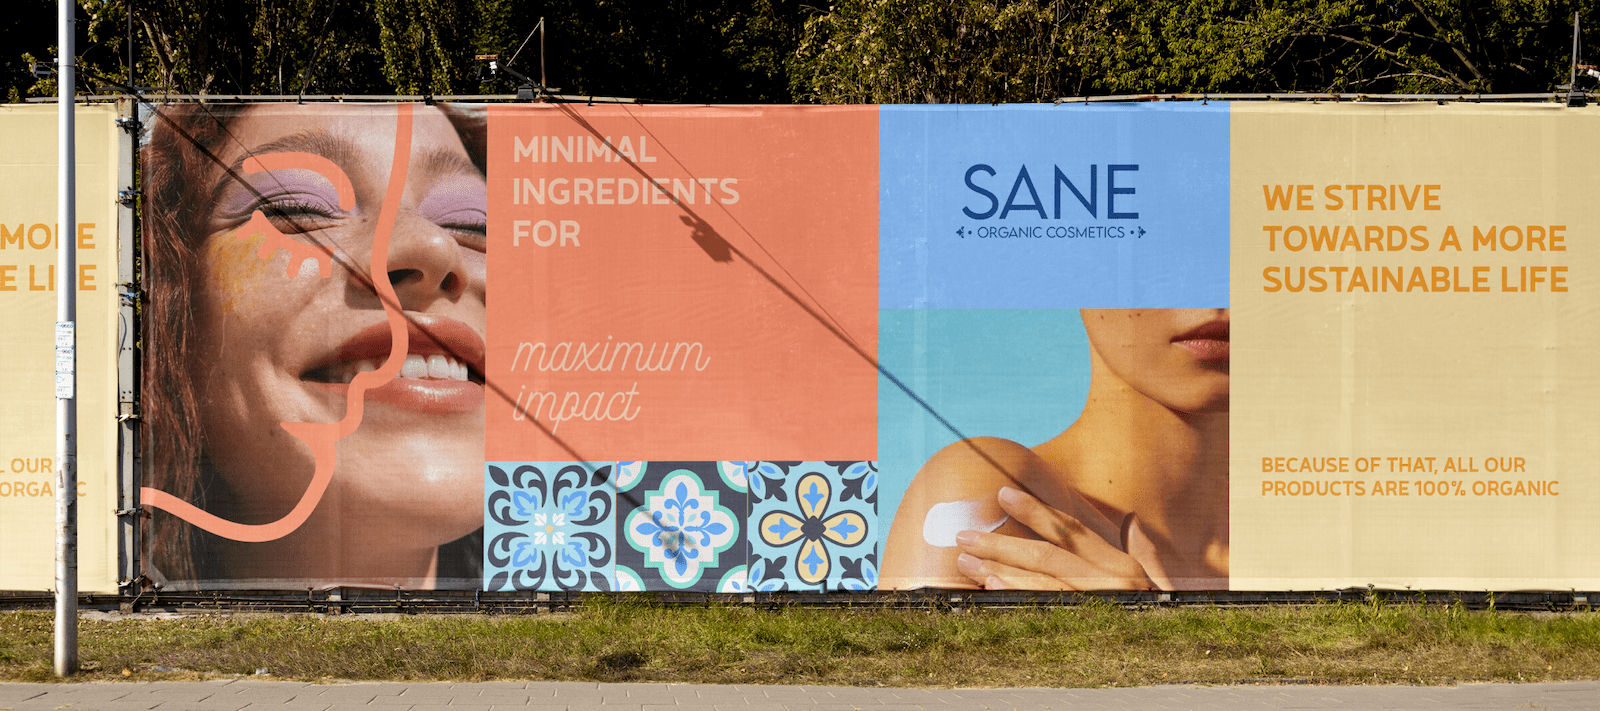 street advertisement made for several image featuring organic cosmetics.